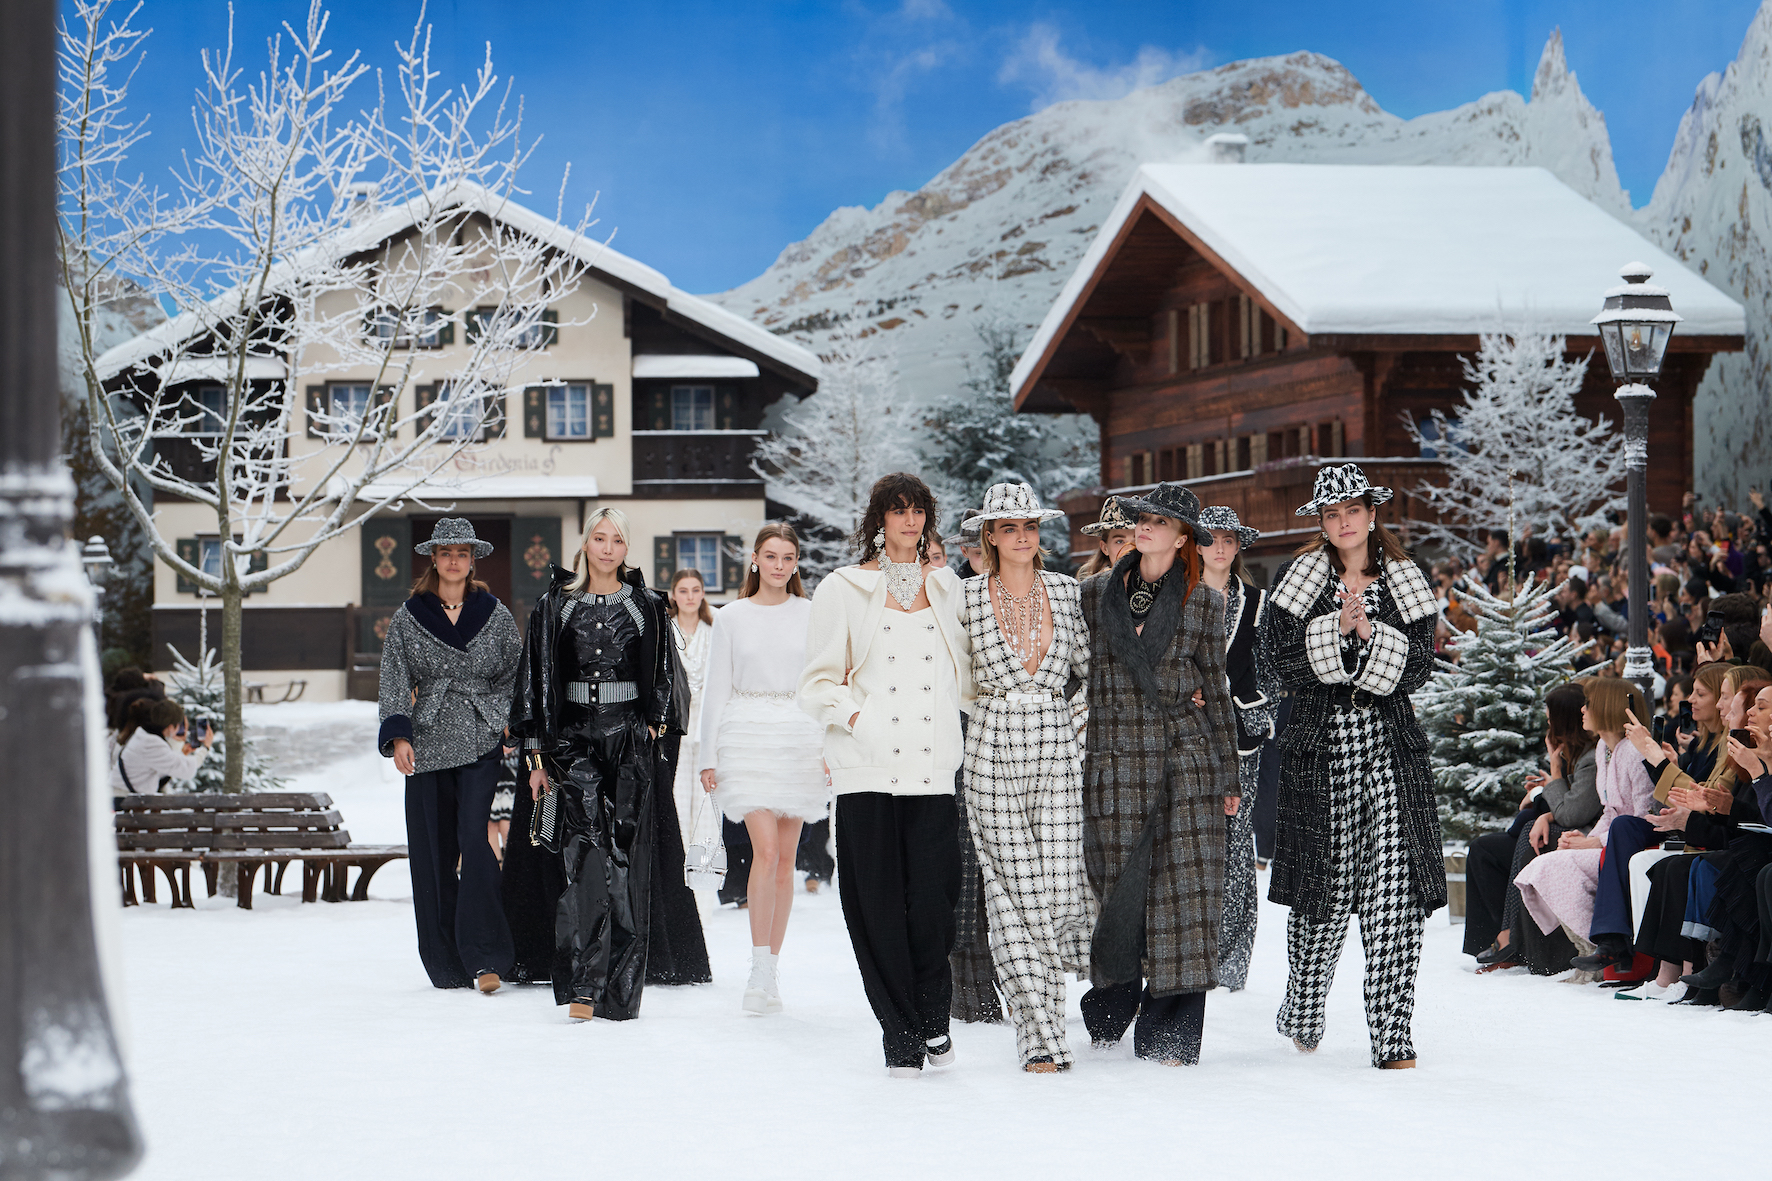 02_FW-2019-20-RTW-Finale-pictures-by-Olivier-Saillant Kopie